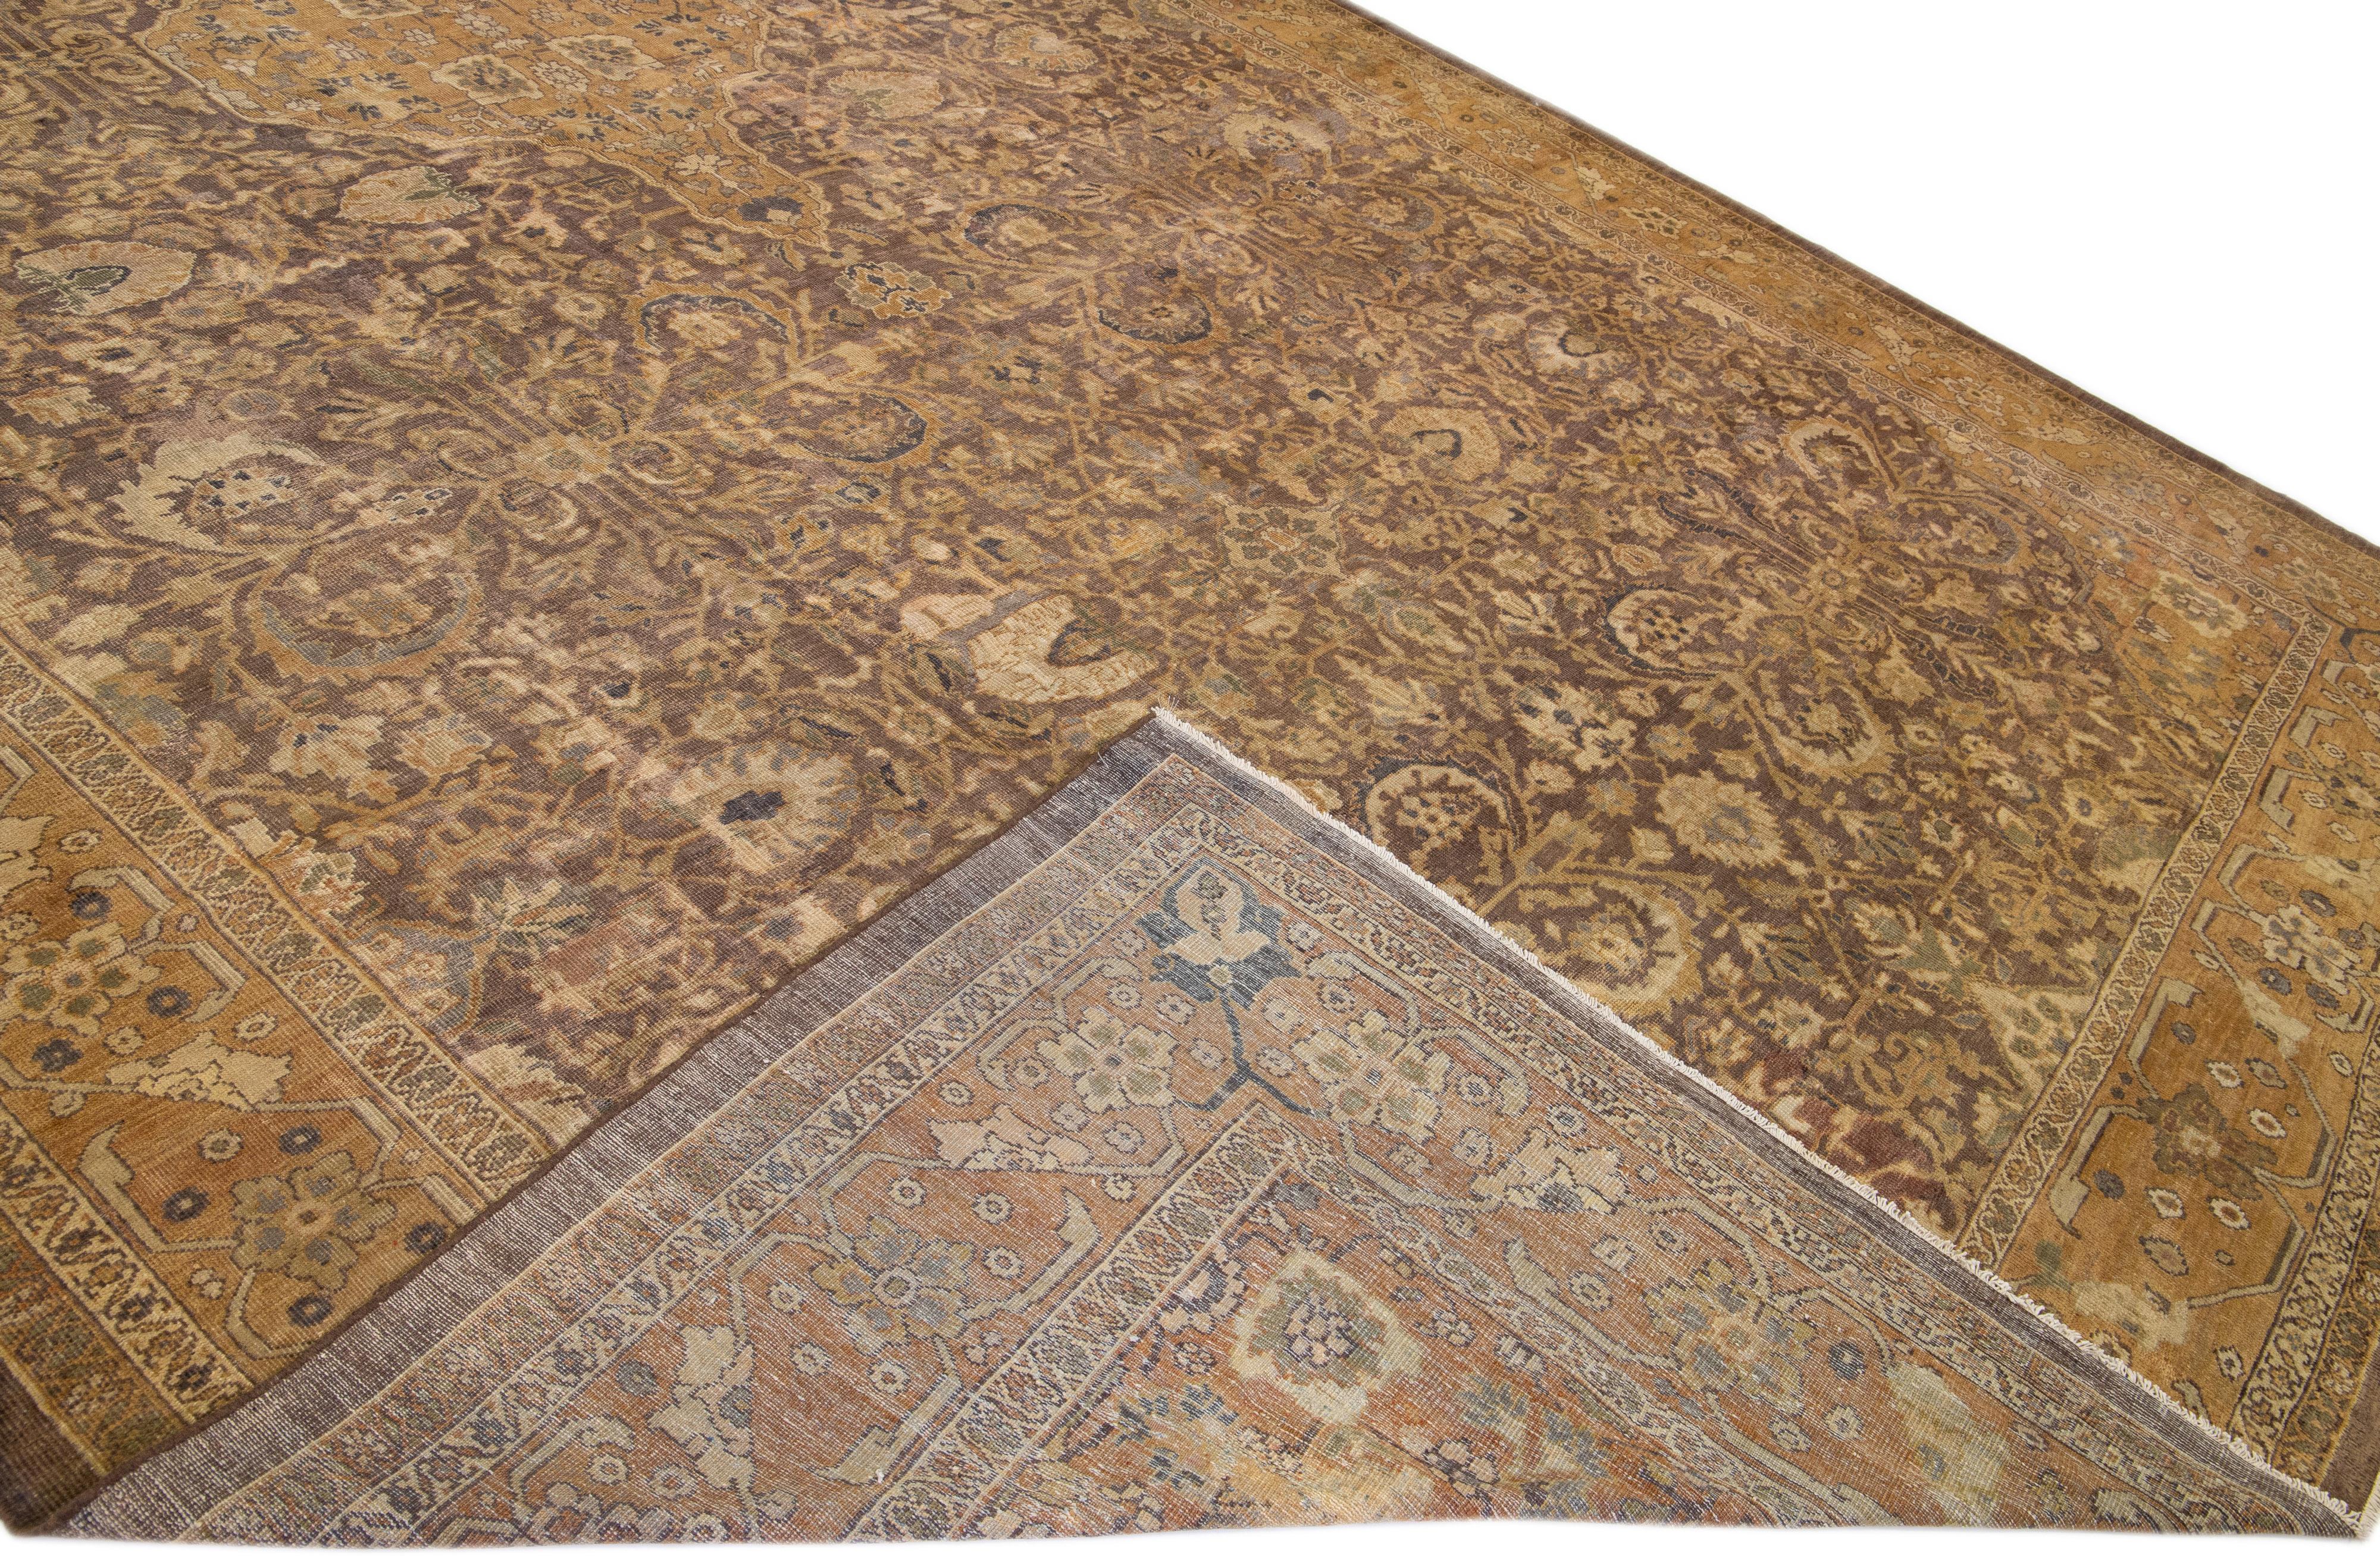 Beautiful antique Persian Sultanabad hand-knotted wool rug with a brown field. This piece has gray and tan accents in a gorgeous all-over floral pattern design.

This rug measures: 12'9